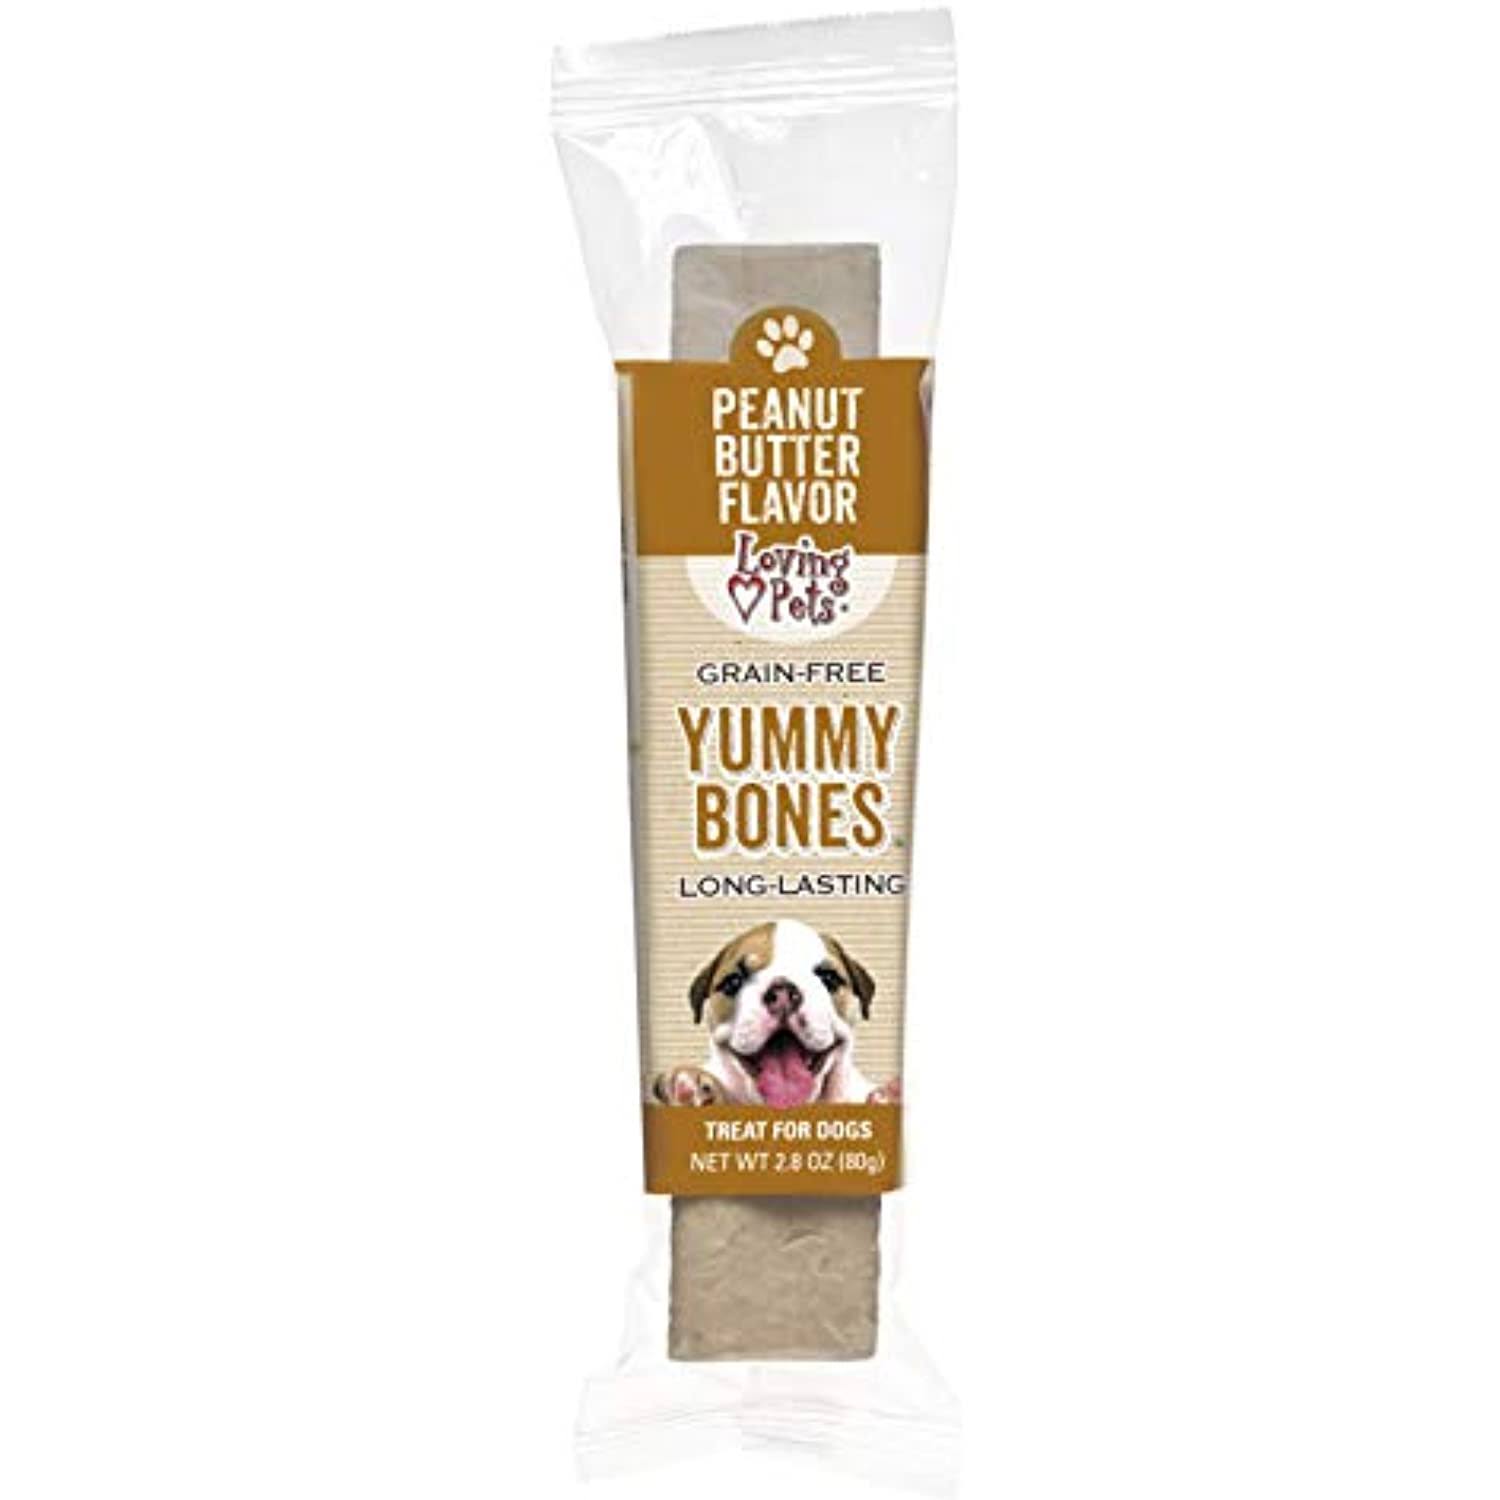 Loving Pets Peanut Butter Yummy Bone Singles for Dogs, Pack of 15 Indi